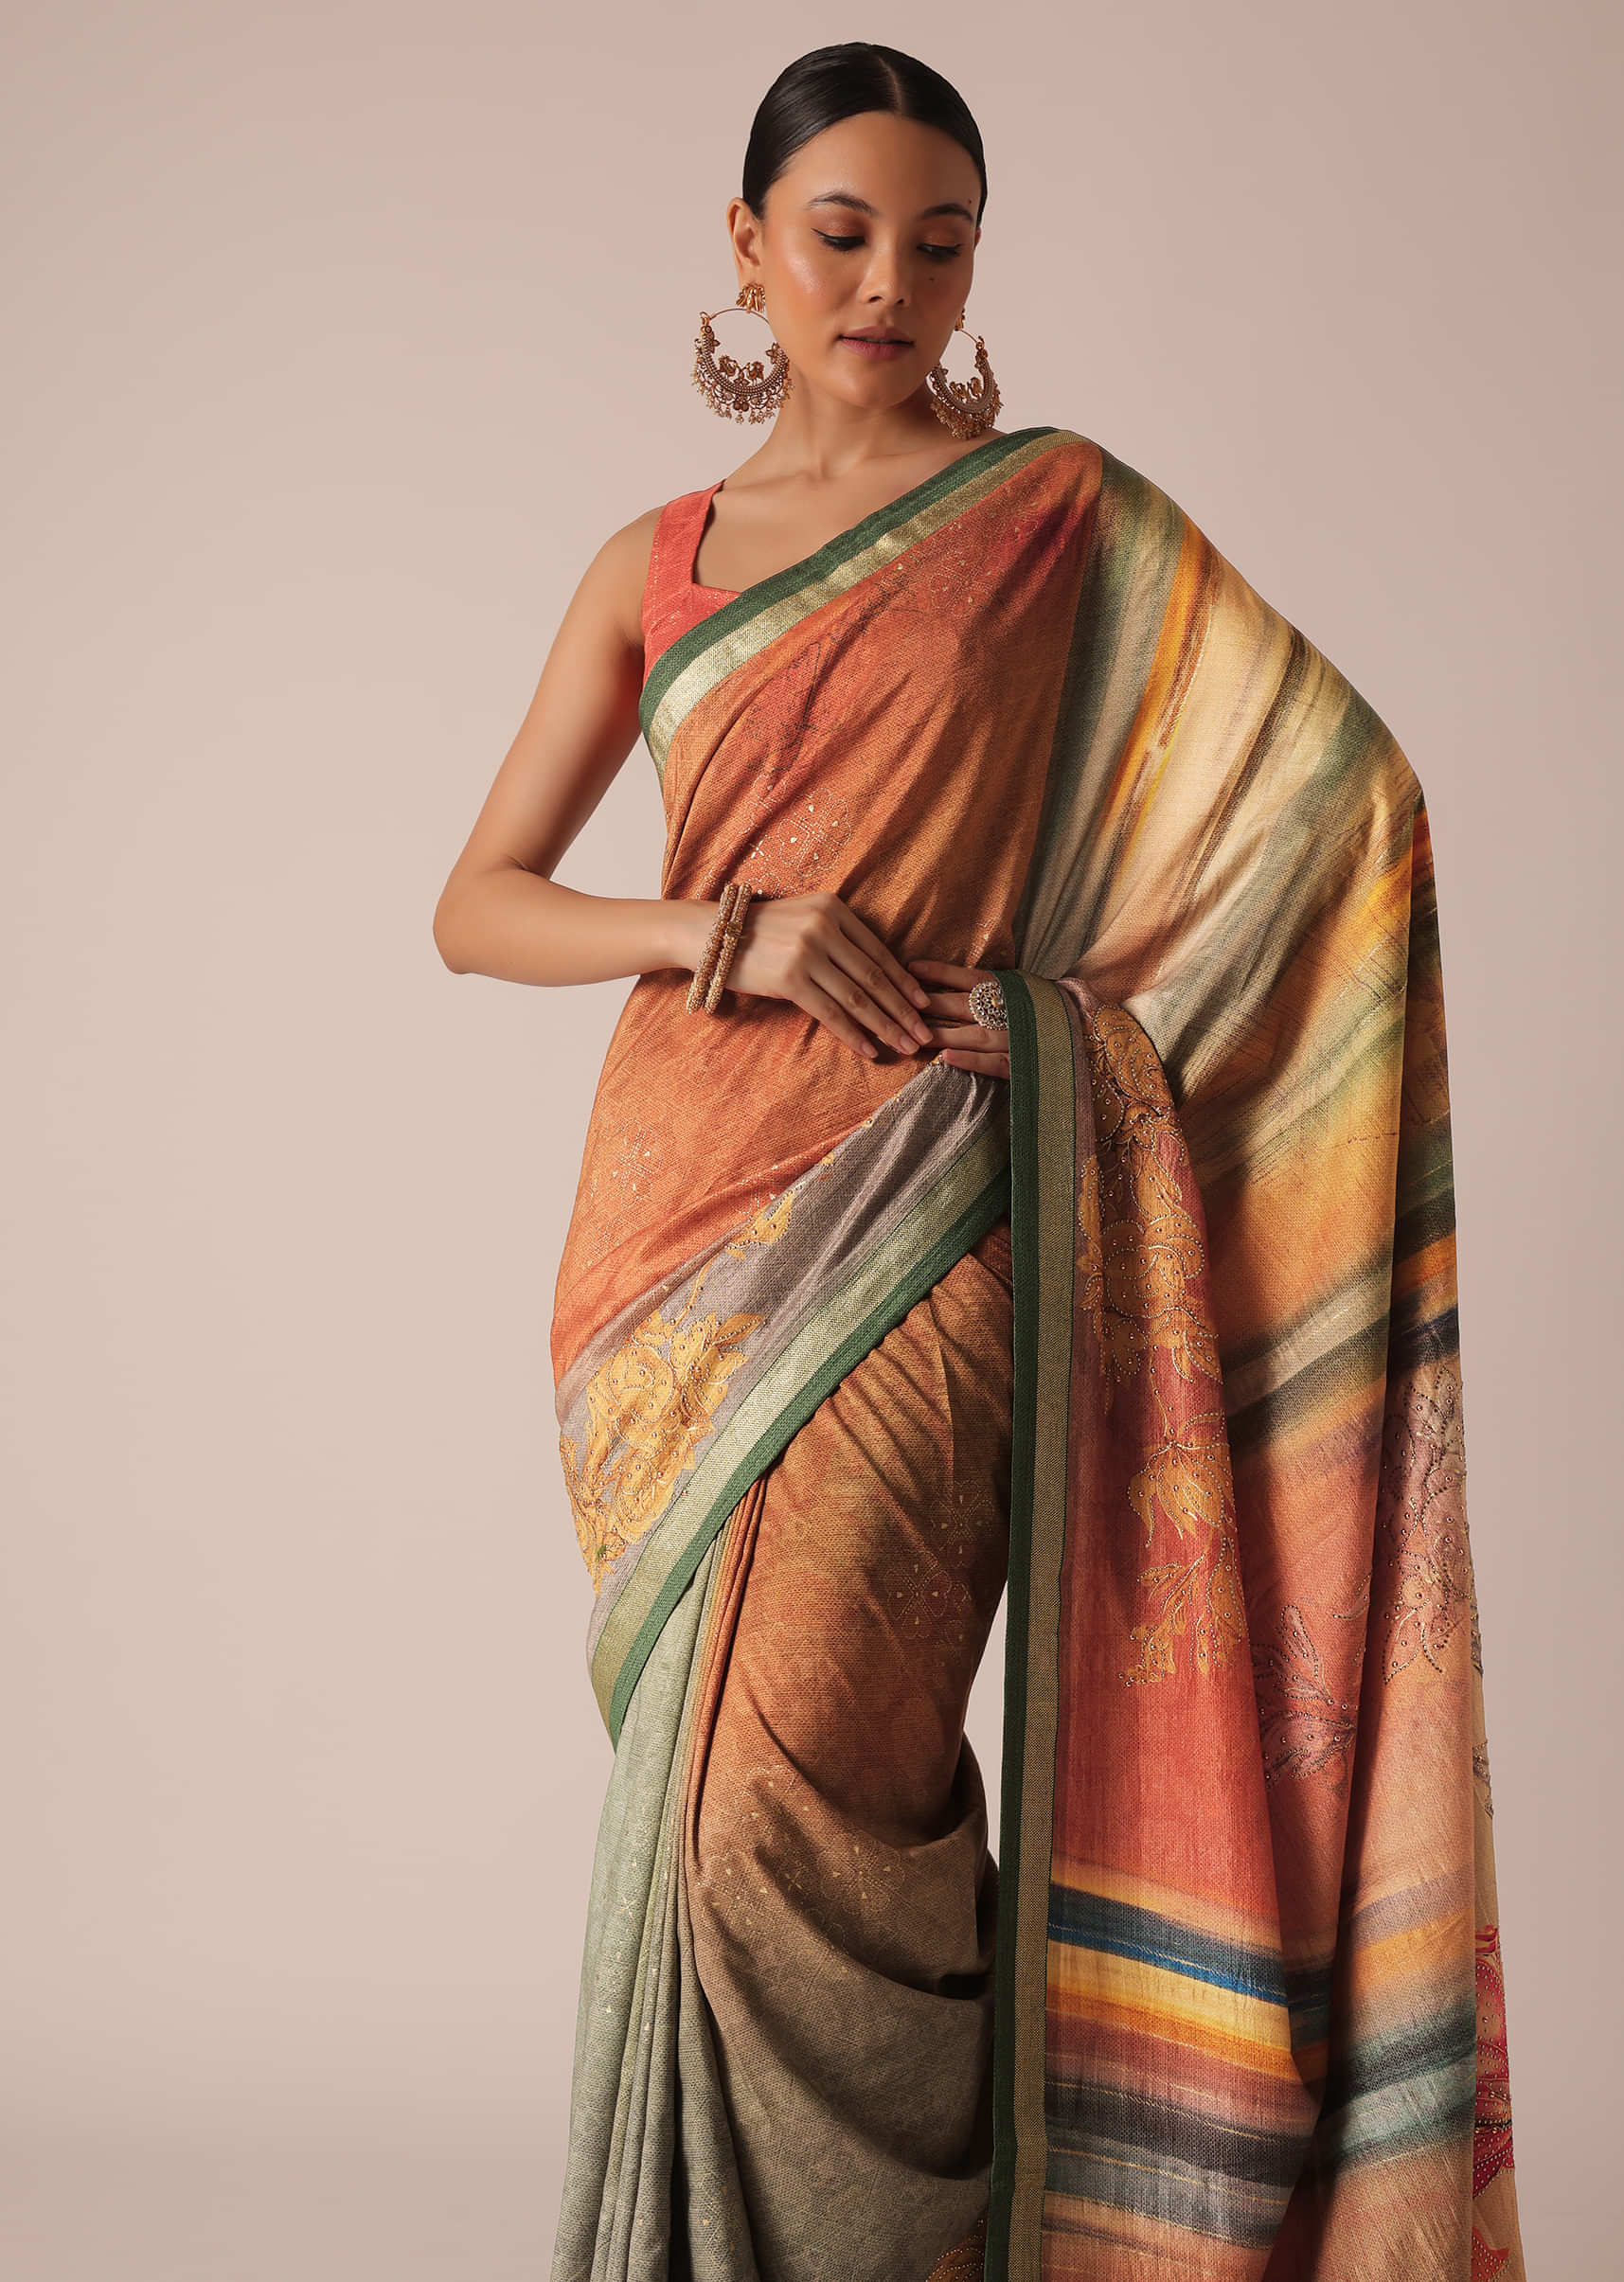 Off White Georgette Saree With Cut Dana Zardosi Embroidery Along With  Copper Detailing